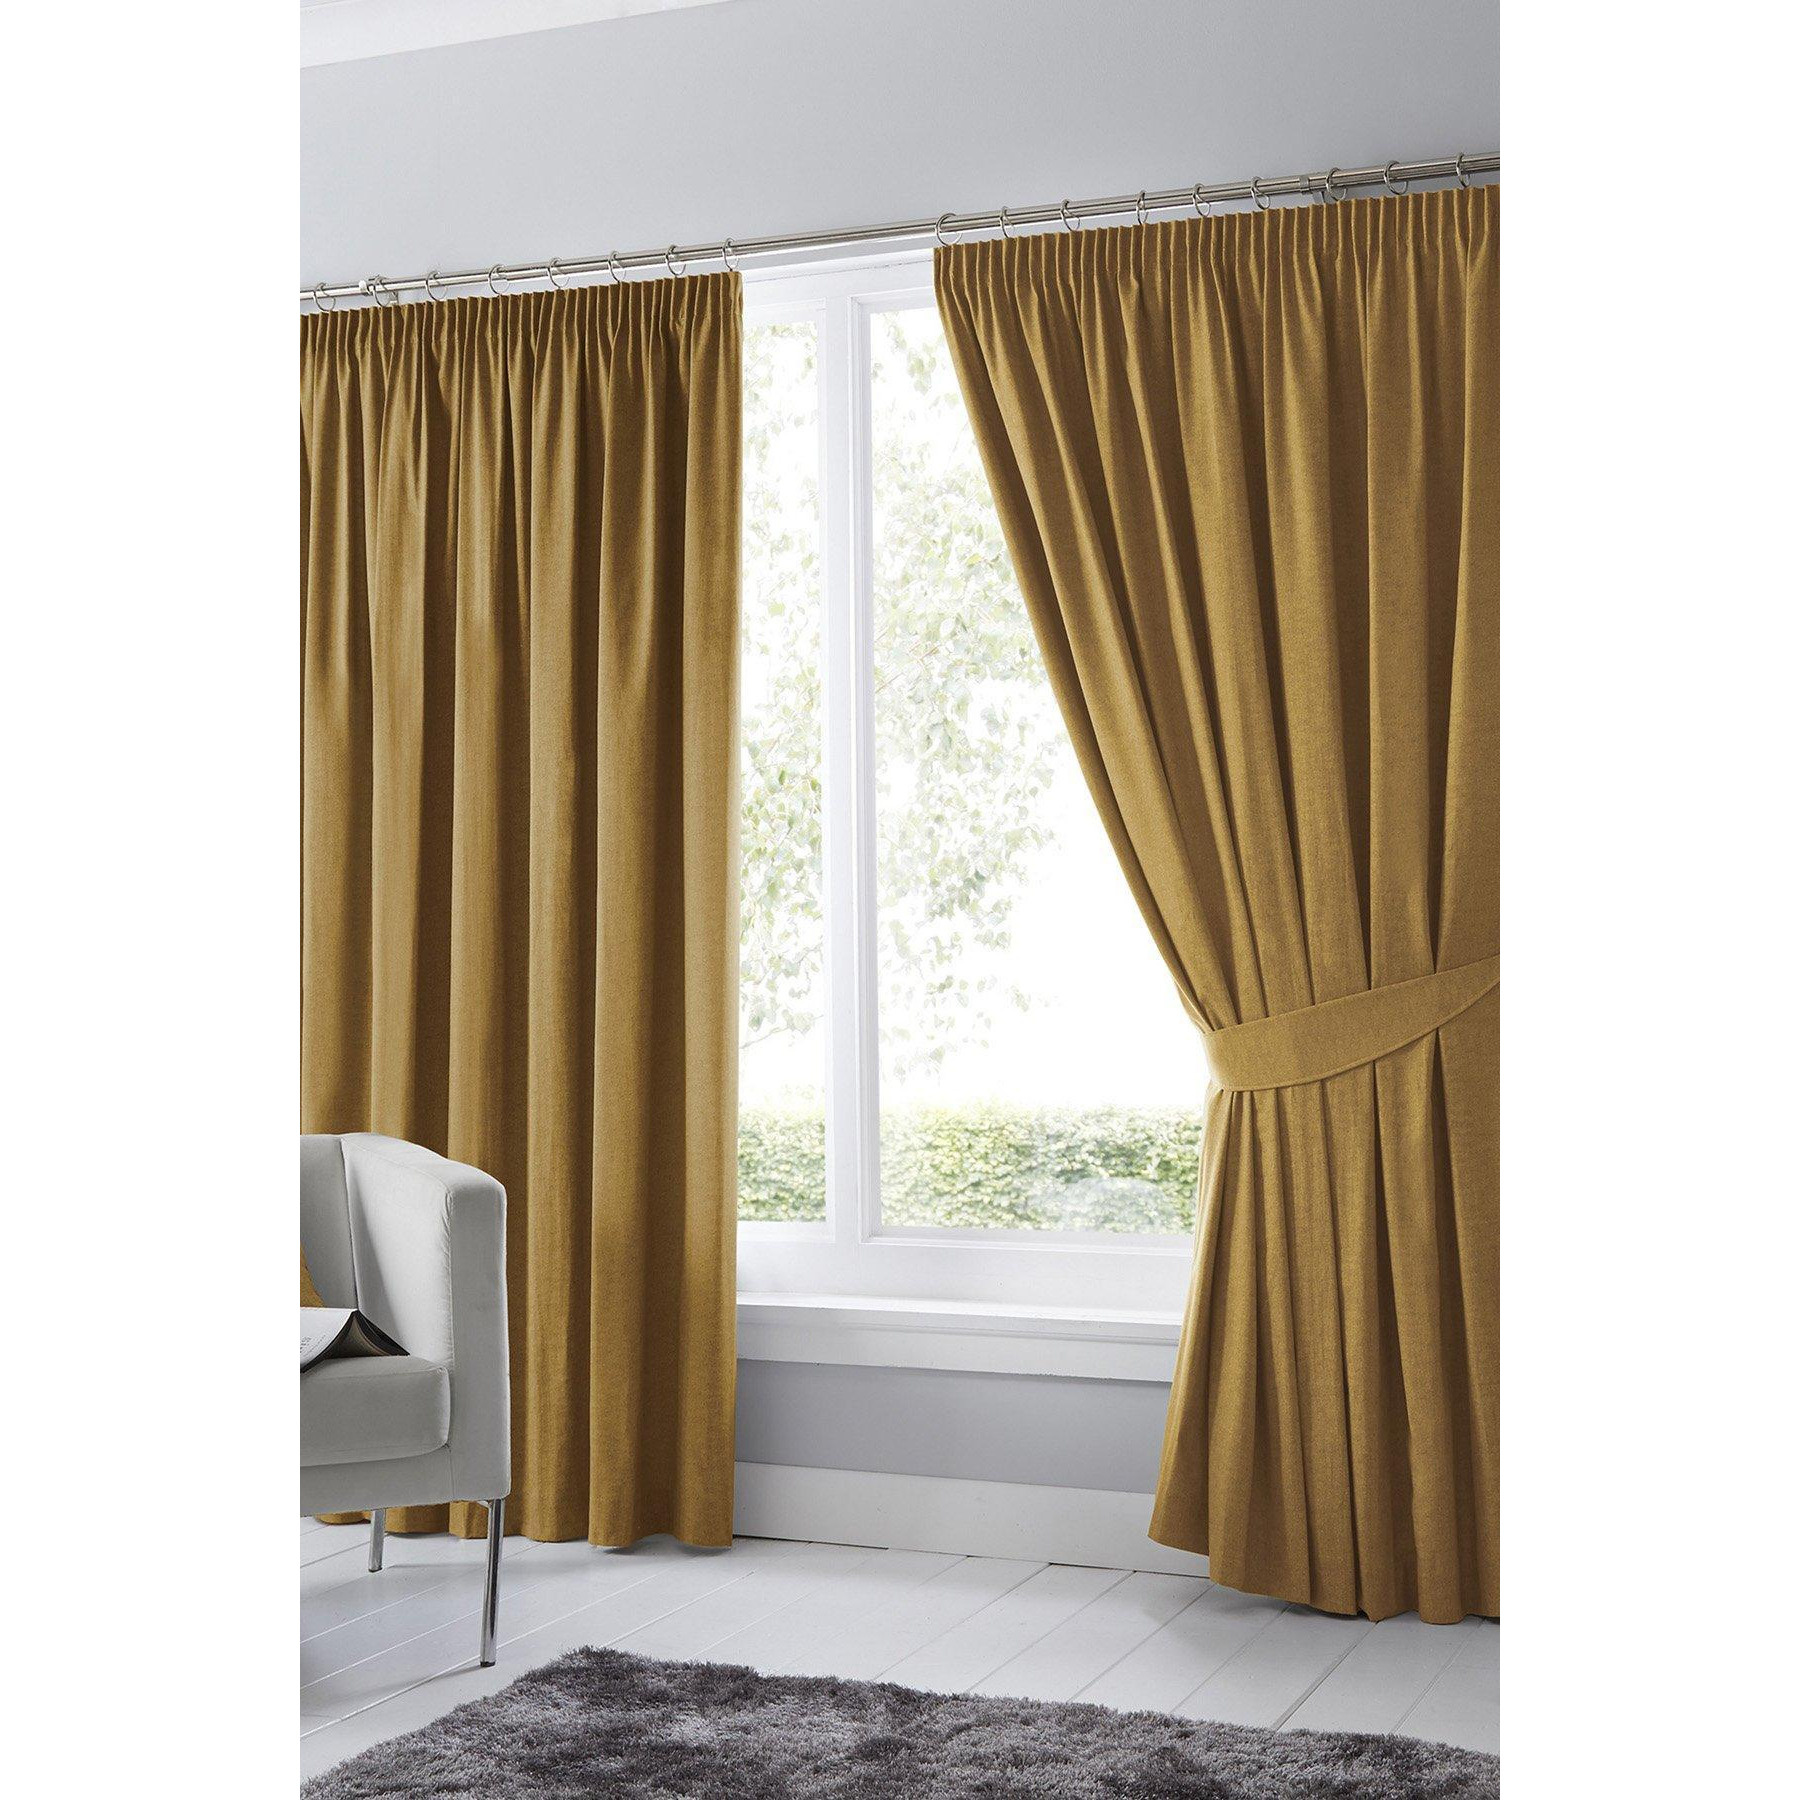 'Dijon' Thermal and Blackout Fully Lined Pencil Pleat Curtains - image 1